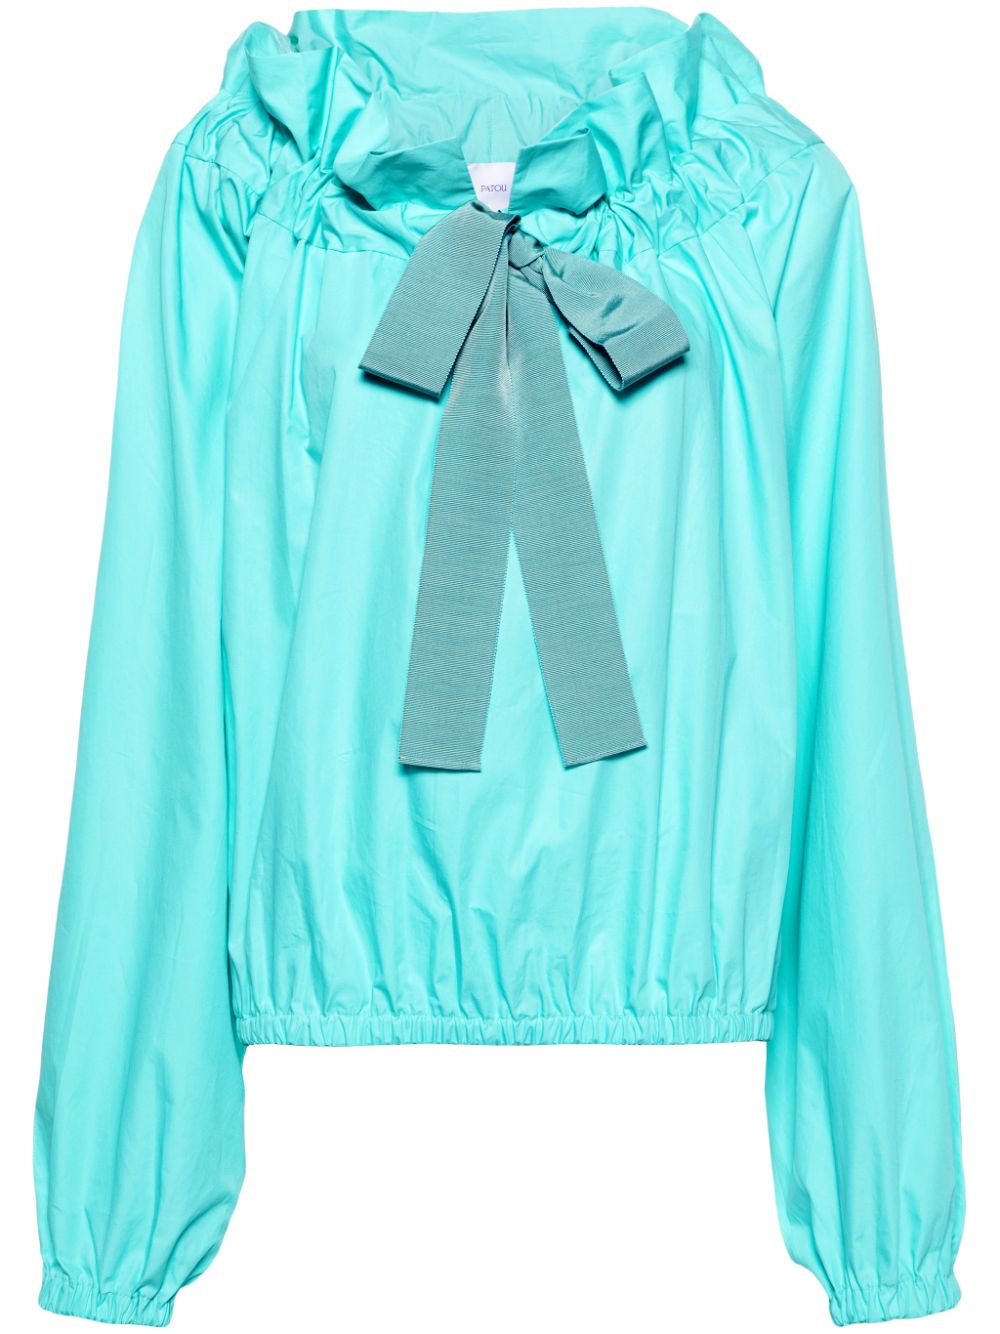 Iconic bow-detail cotton blouse<BR/><BR/><BR/>